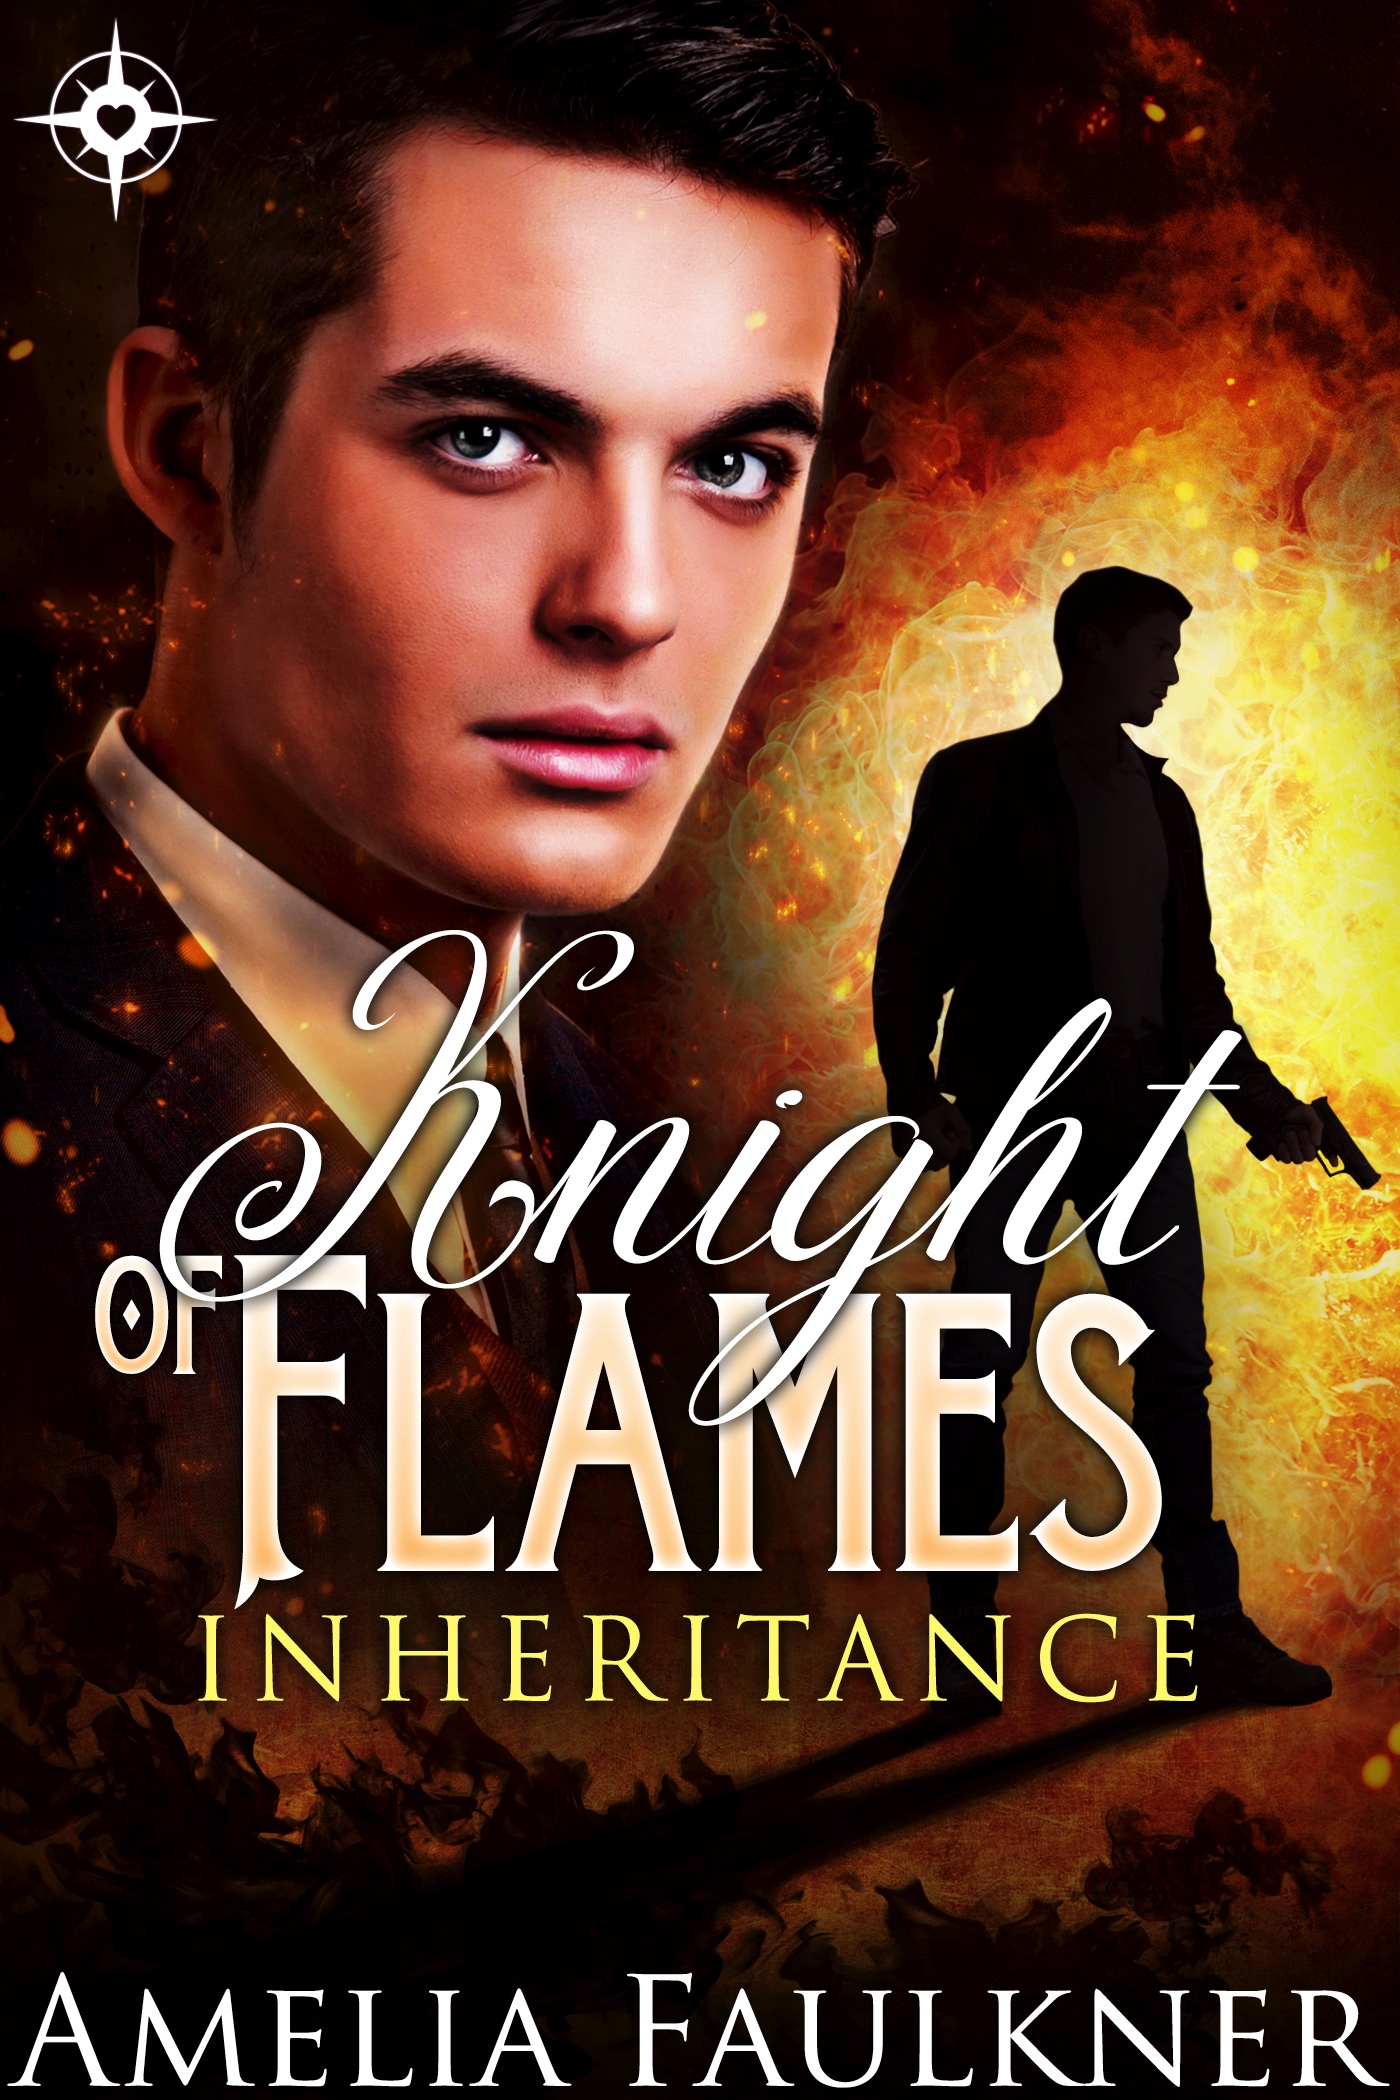 Knight-of-Flames-Kindle.jpg